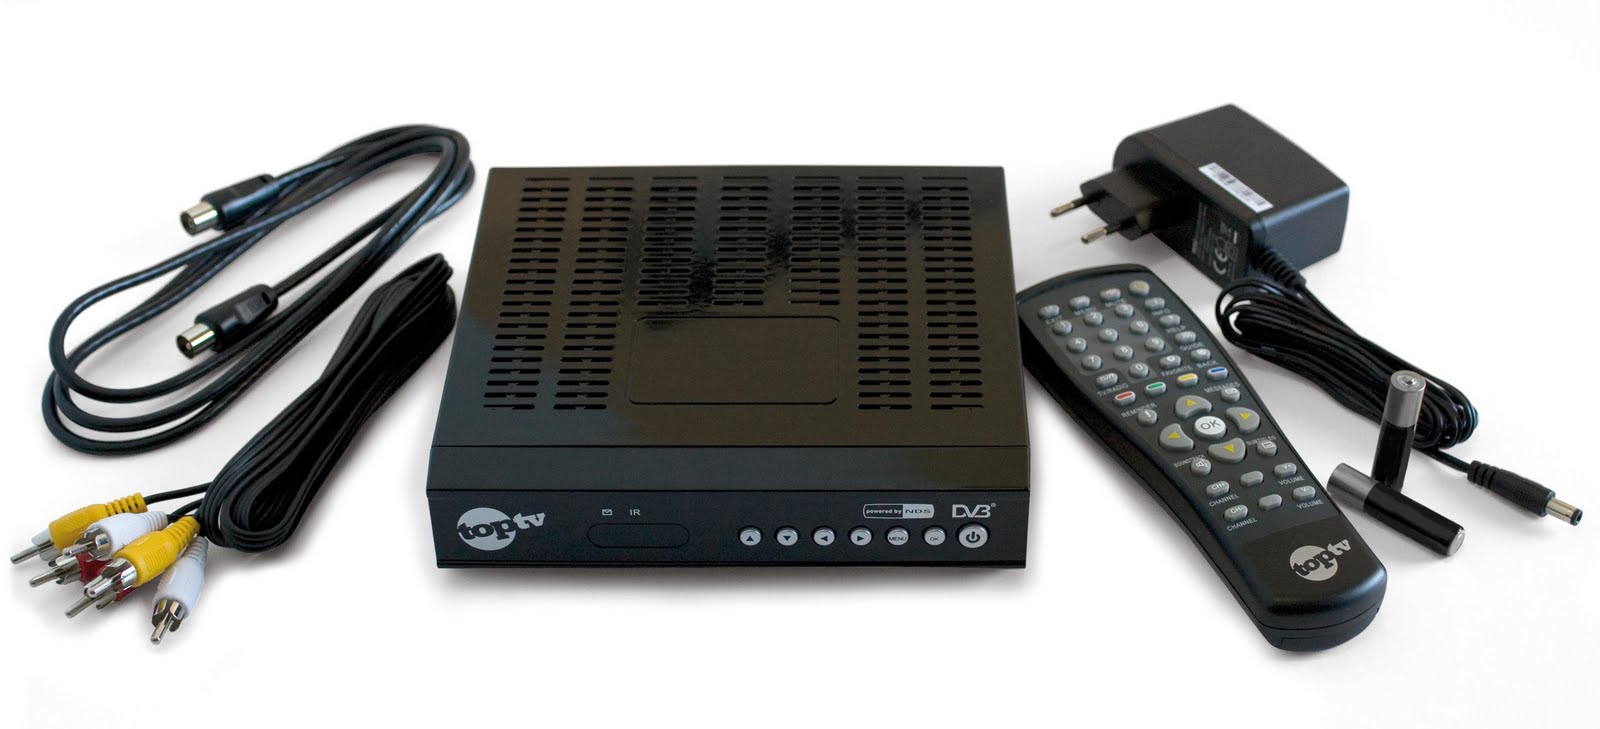 TV with Thinus: FIRST LOOK! TopTV set top box decoder revealed.